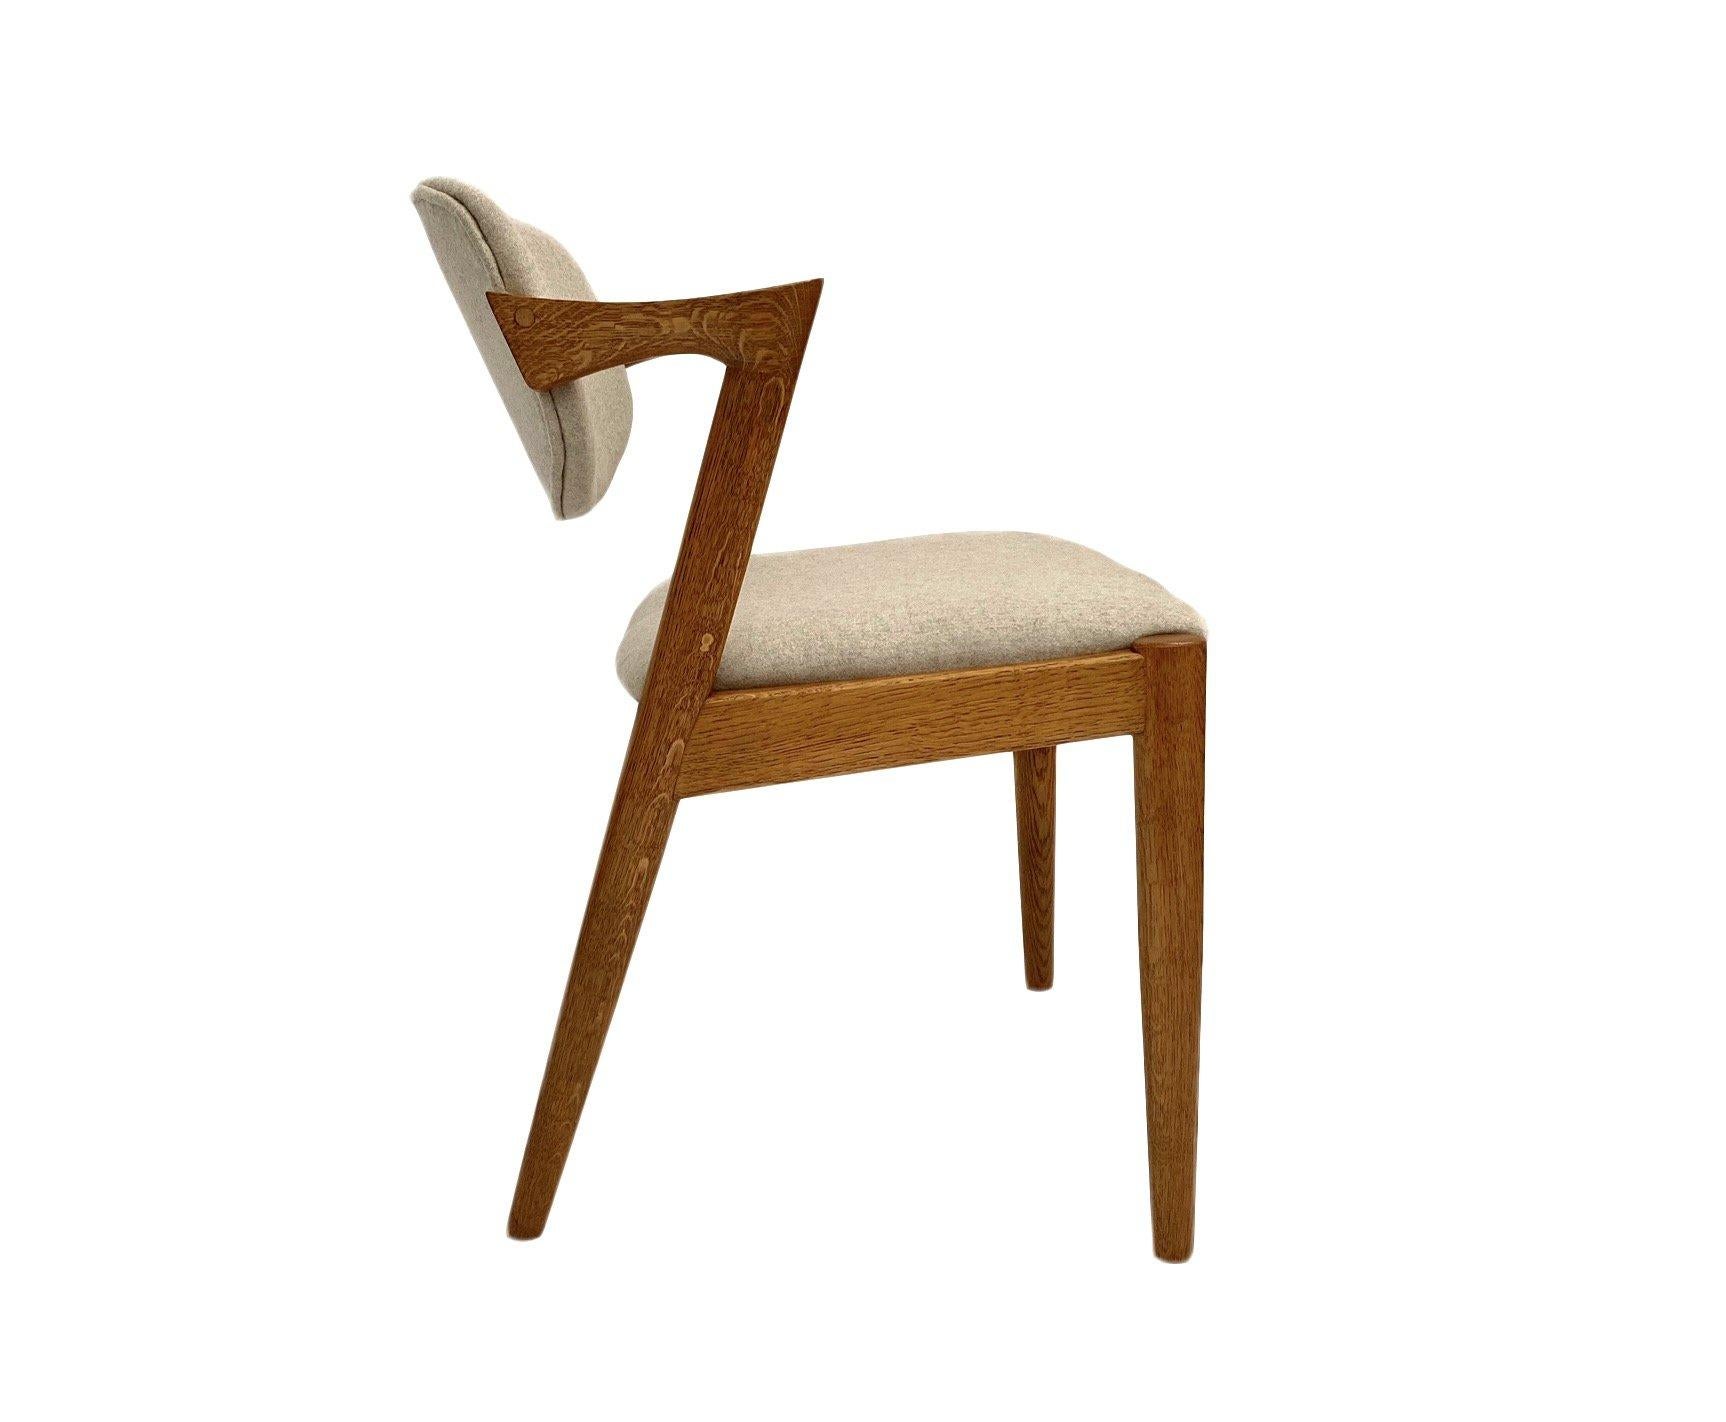 A beautiful iconic Model 42 oak and cream wool dining chair designed by Kai Kristiansen for Shous Møbelfabrik, this would make a stylish addition to any dining area.

The chair has a wide seat pad and a tilting sculptured backrest for enhanced